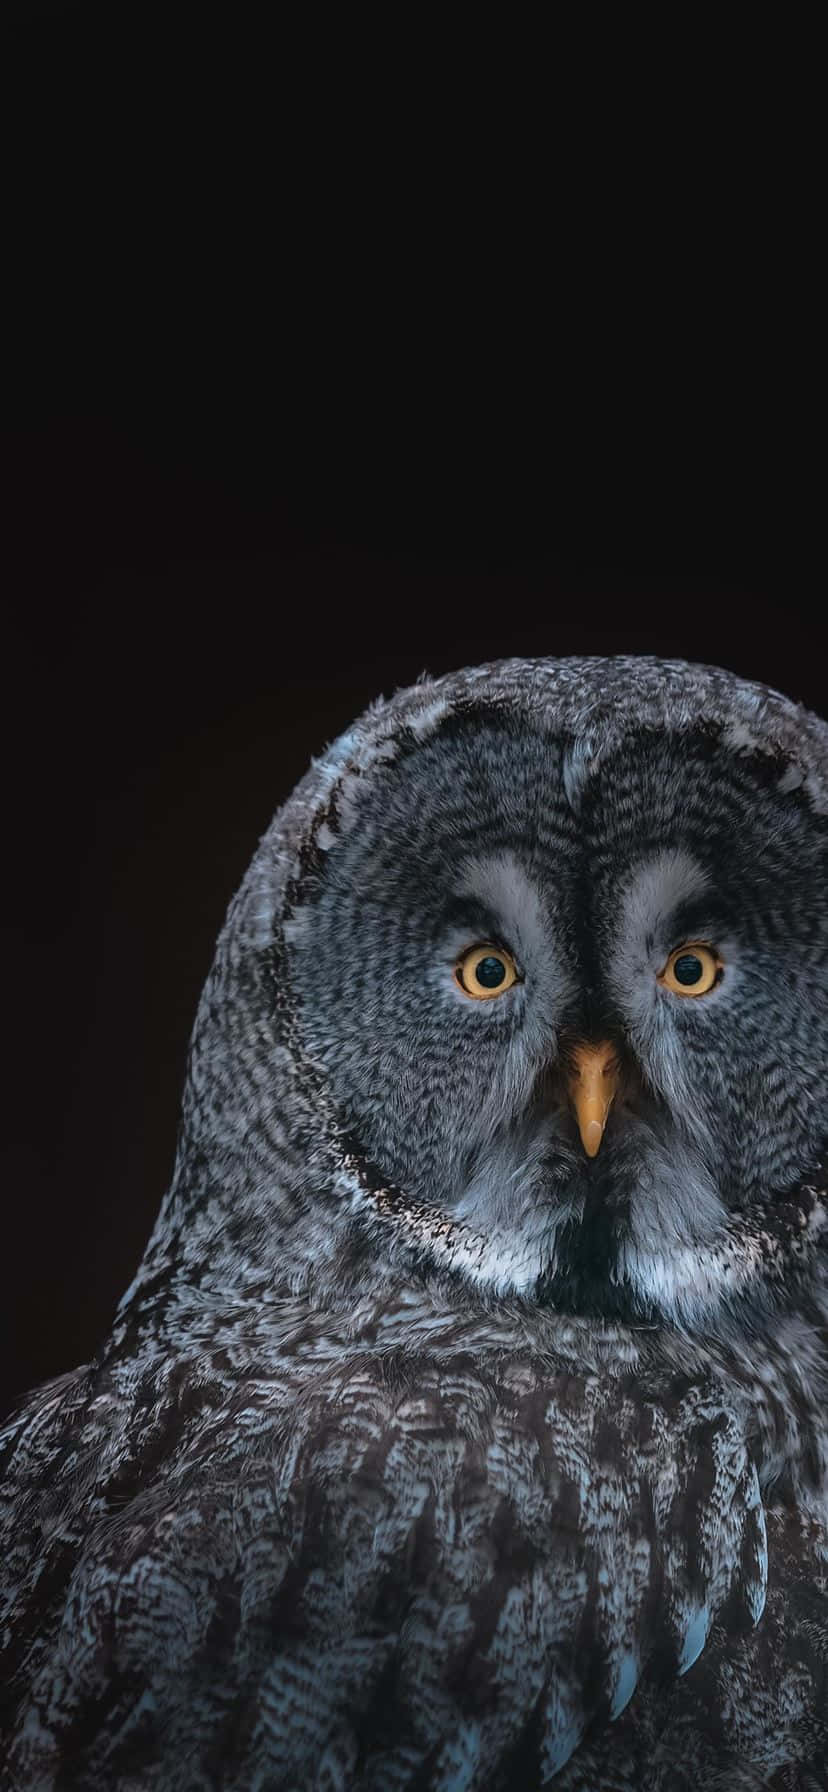 Get The Owl Phone, The Best In Smartphone Design Background